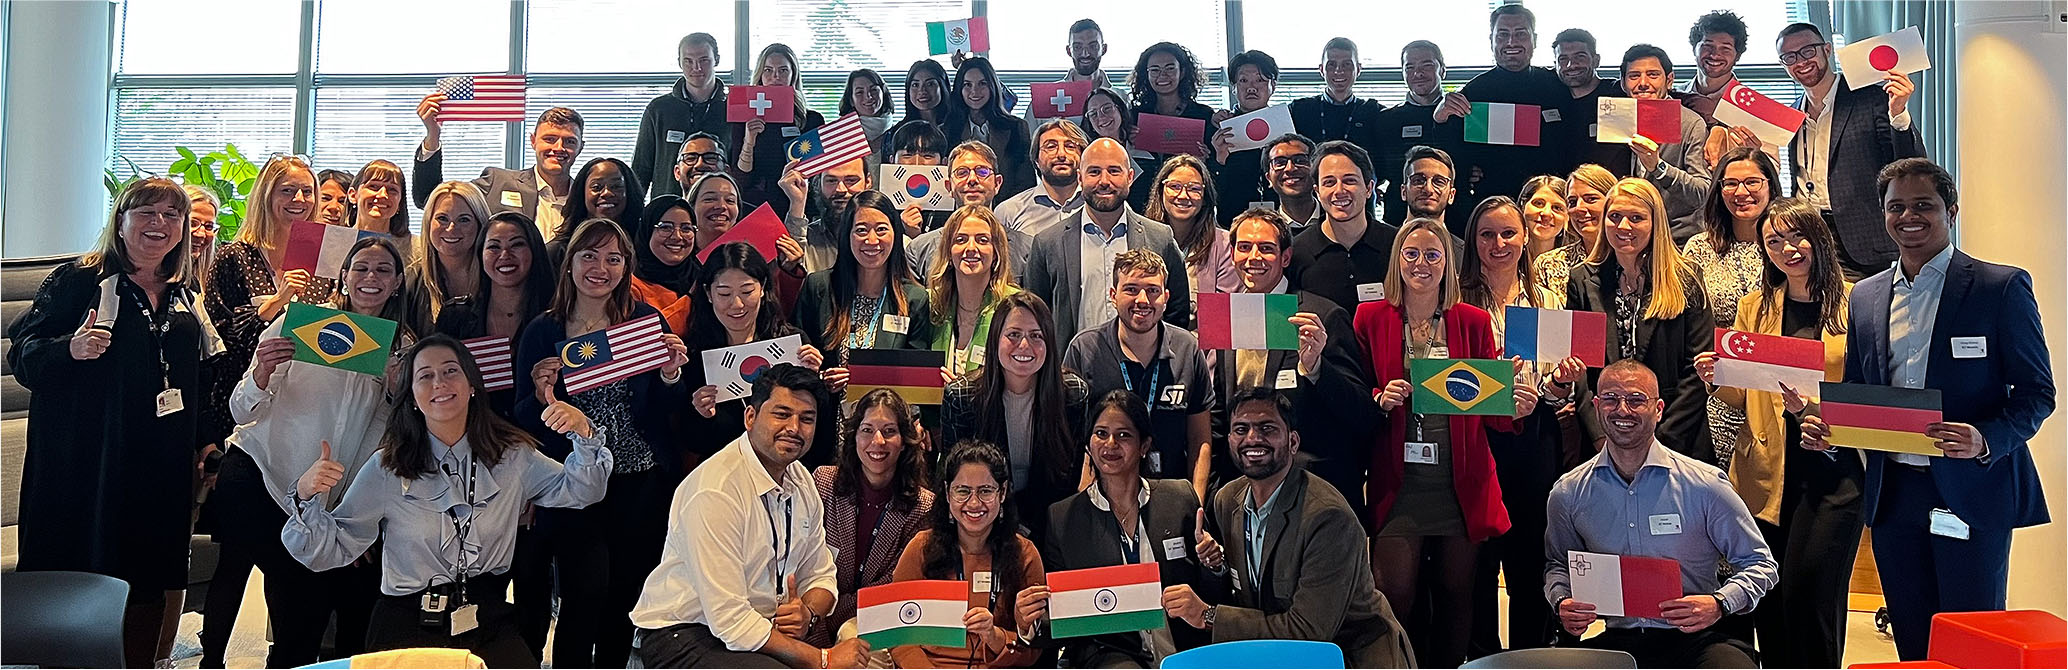 group photo of employees holding flags from different countries (photo)